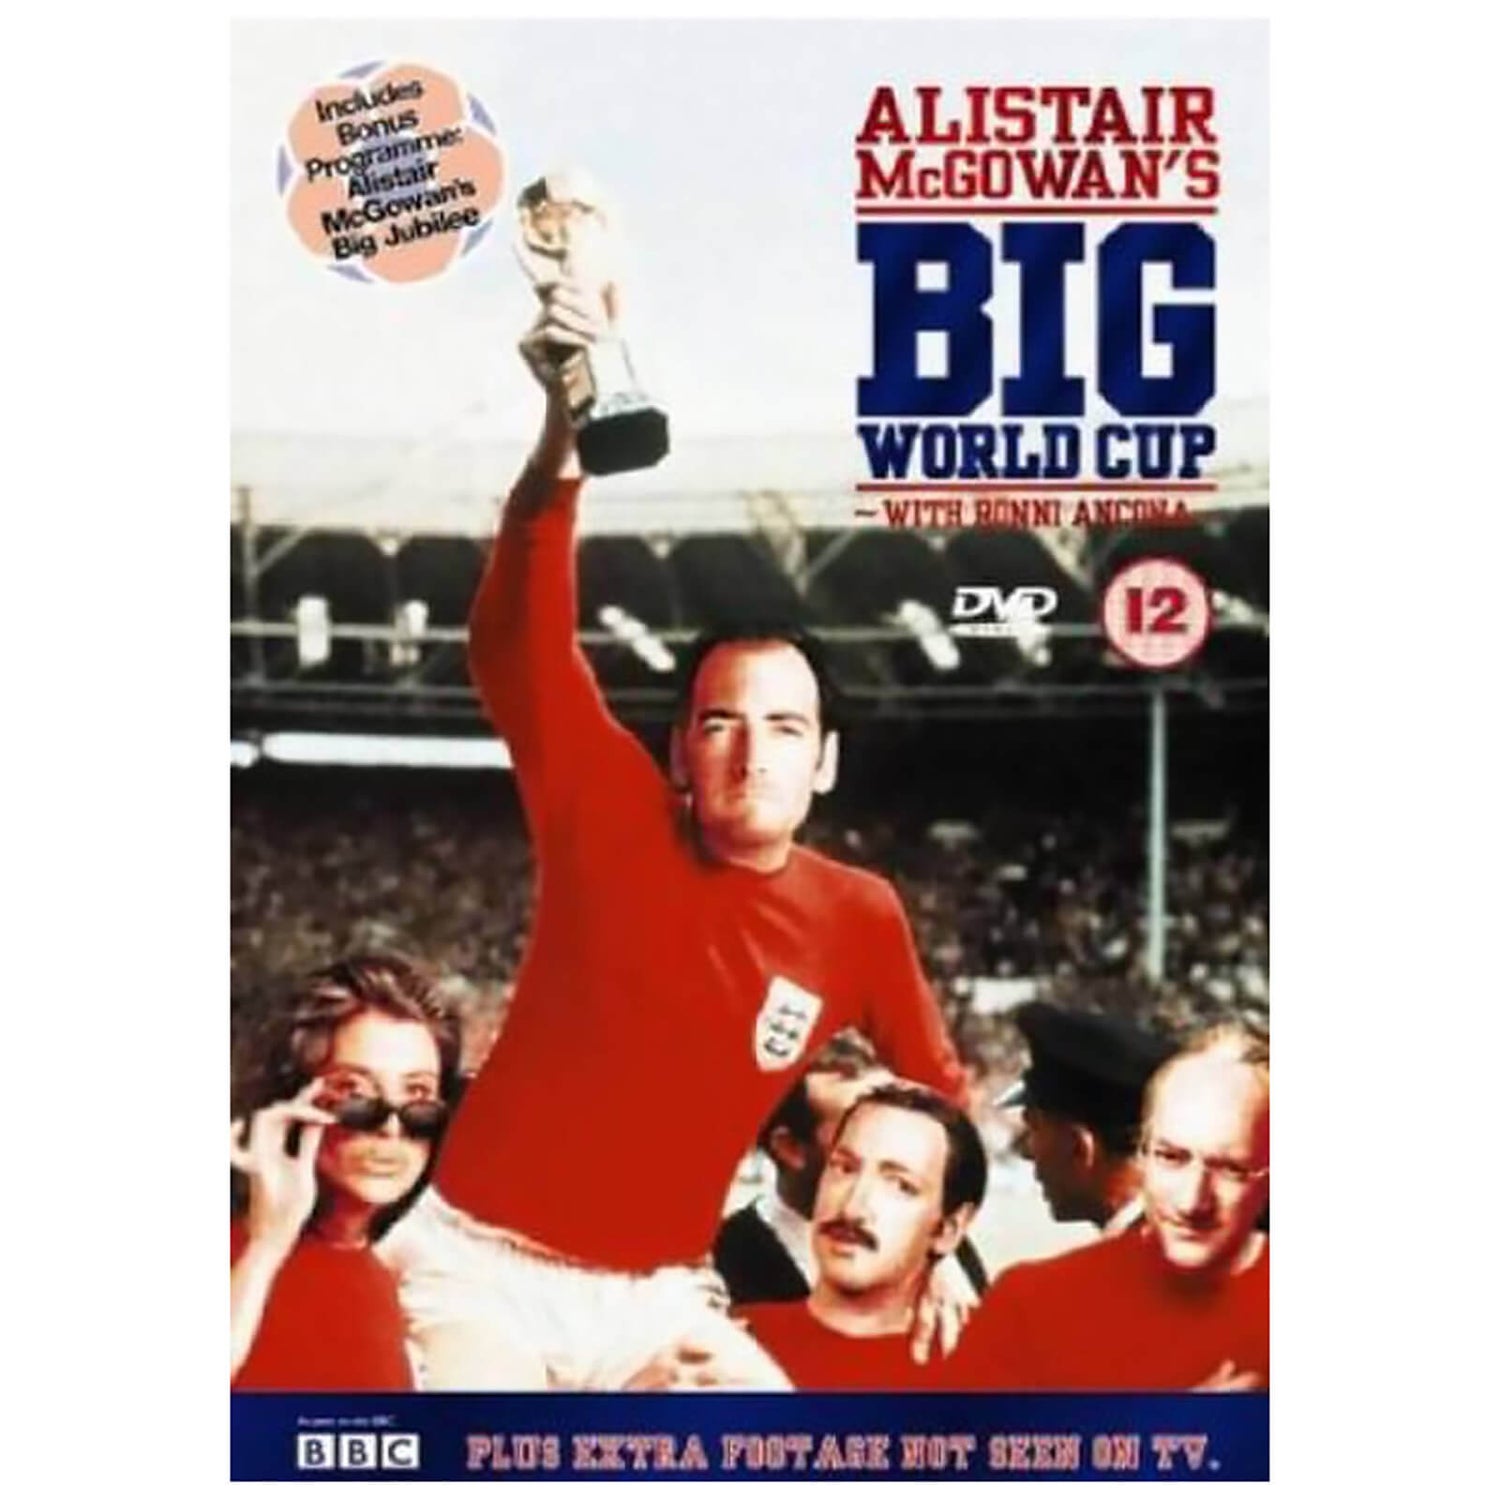 Alistair McGowans Big Impression World Cup Special